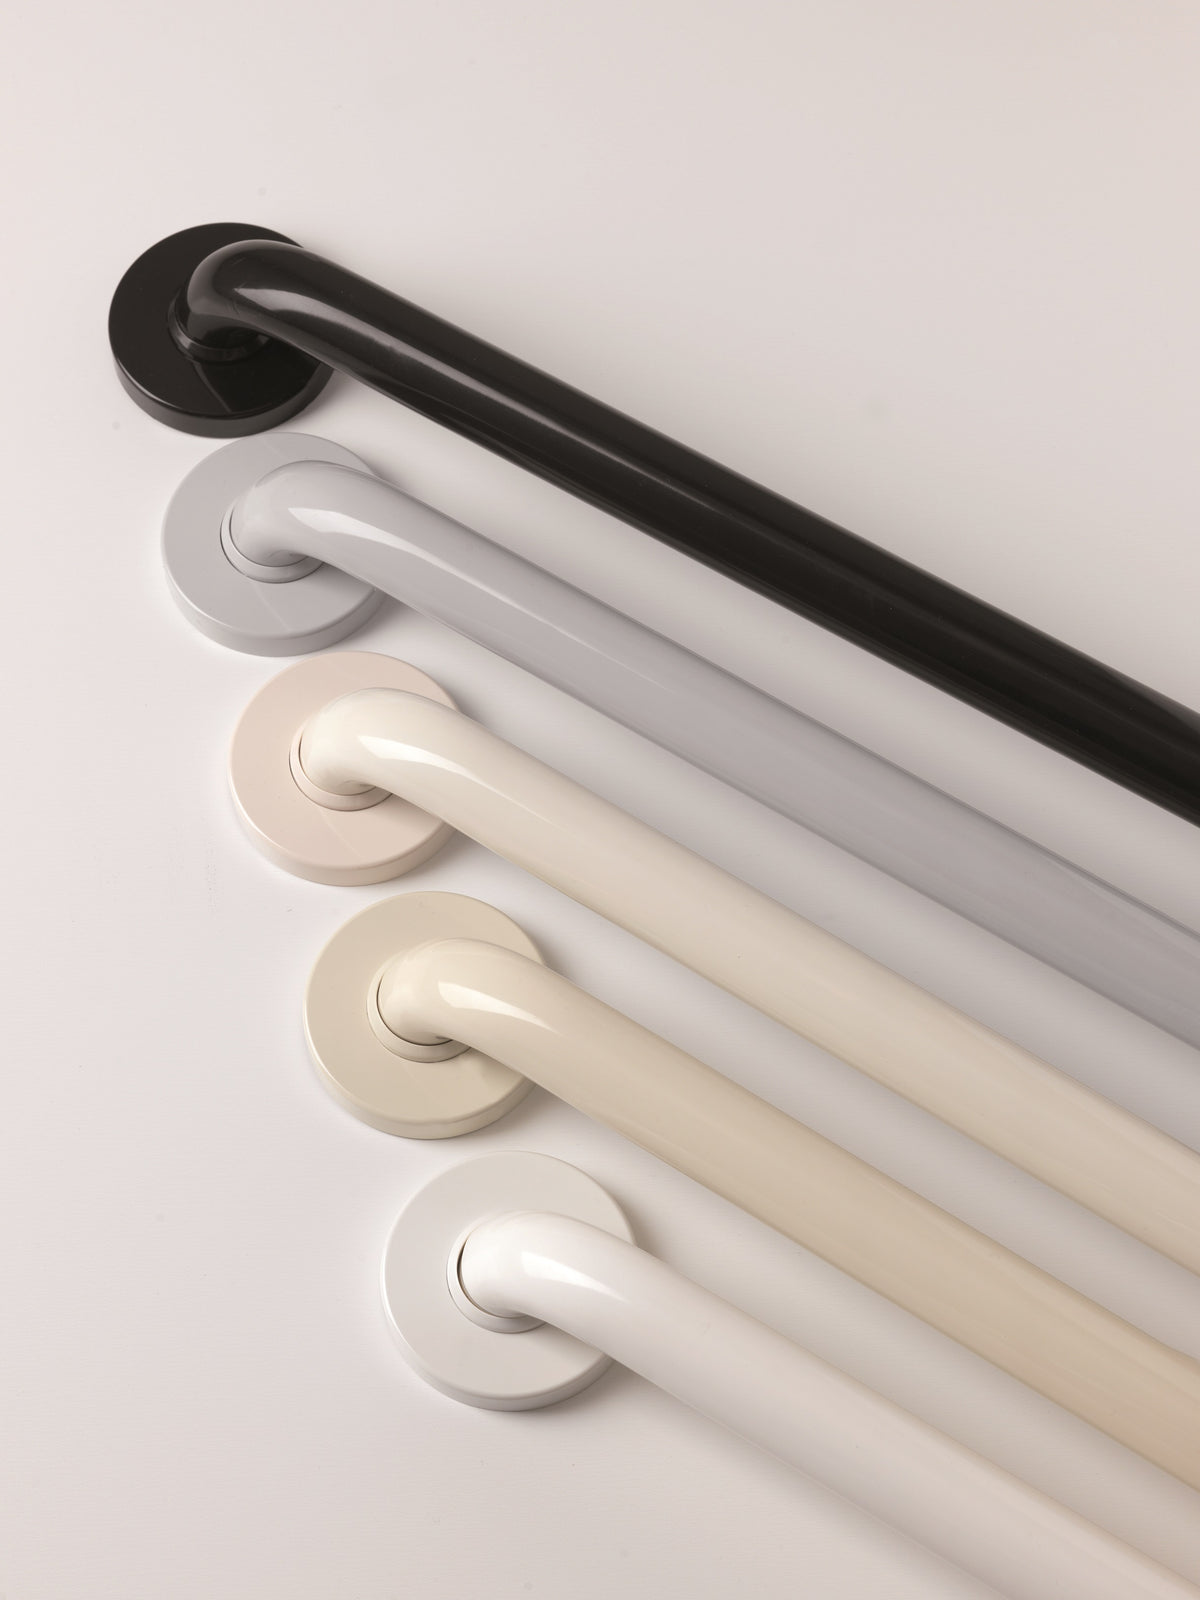 Grab bars all have a 1 ¼” diameter which makes them comfortable for both large and small hands. They are easy to clean with just dish soap and a soft cloth. Available in 5 colors and 7 lengths. All sizes are ADA rated. The 16”, 18”, 24”, 32”, 36” have a 500-pound load capacity. The 42” and 48” lengths have a 330-pound load capacity.